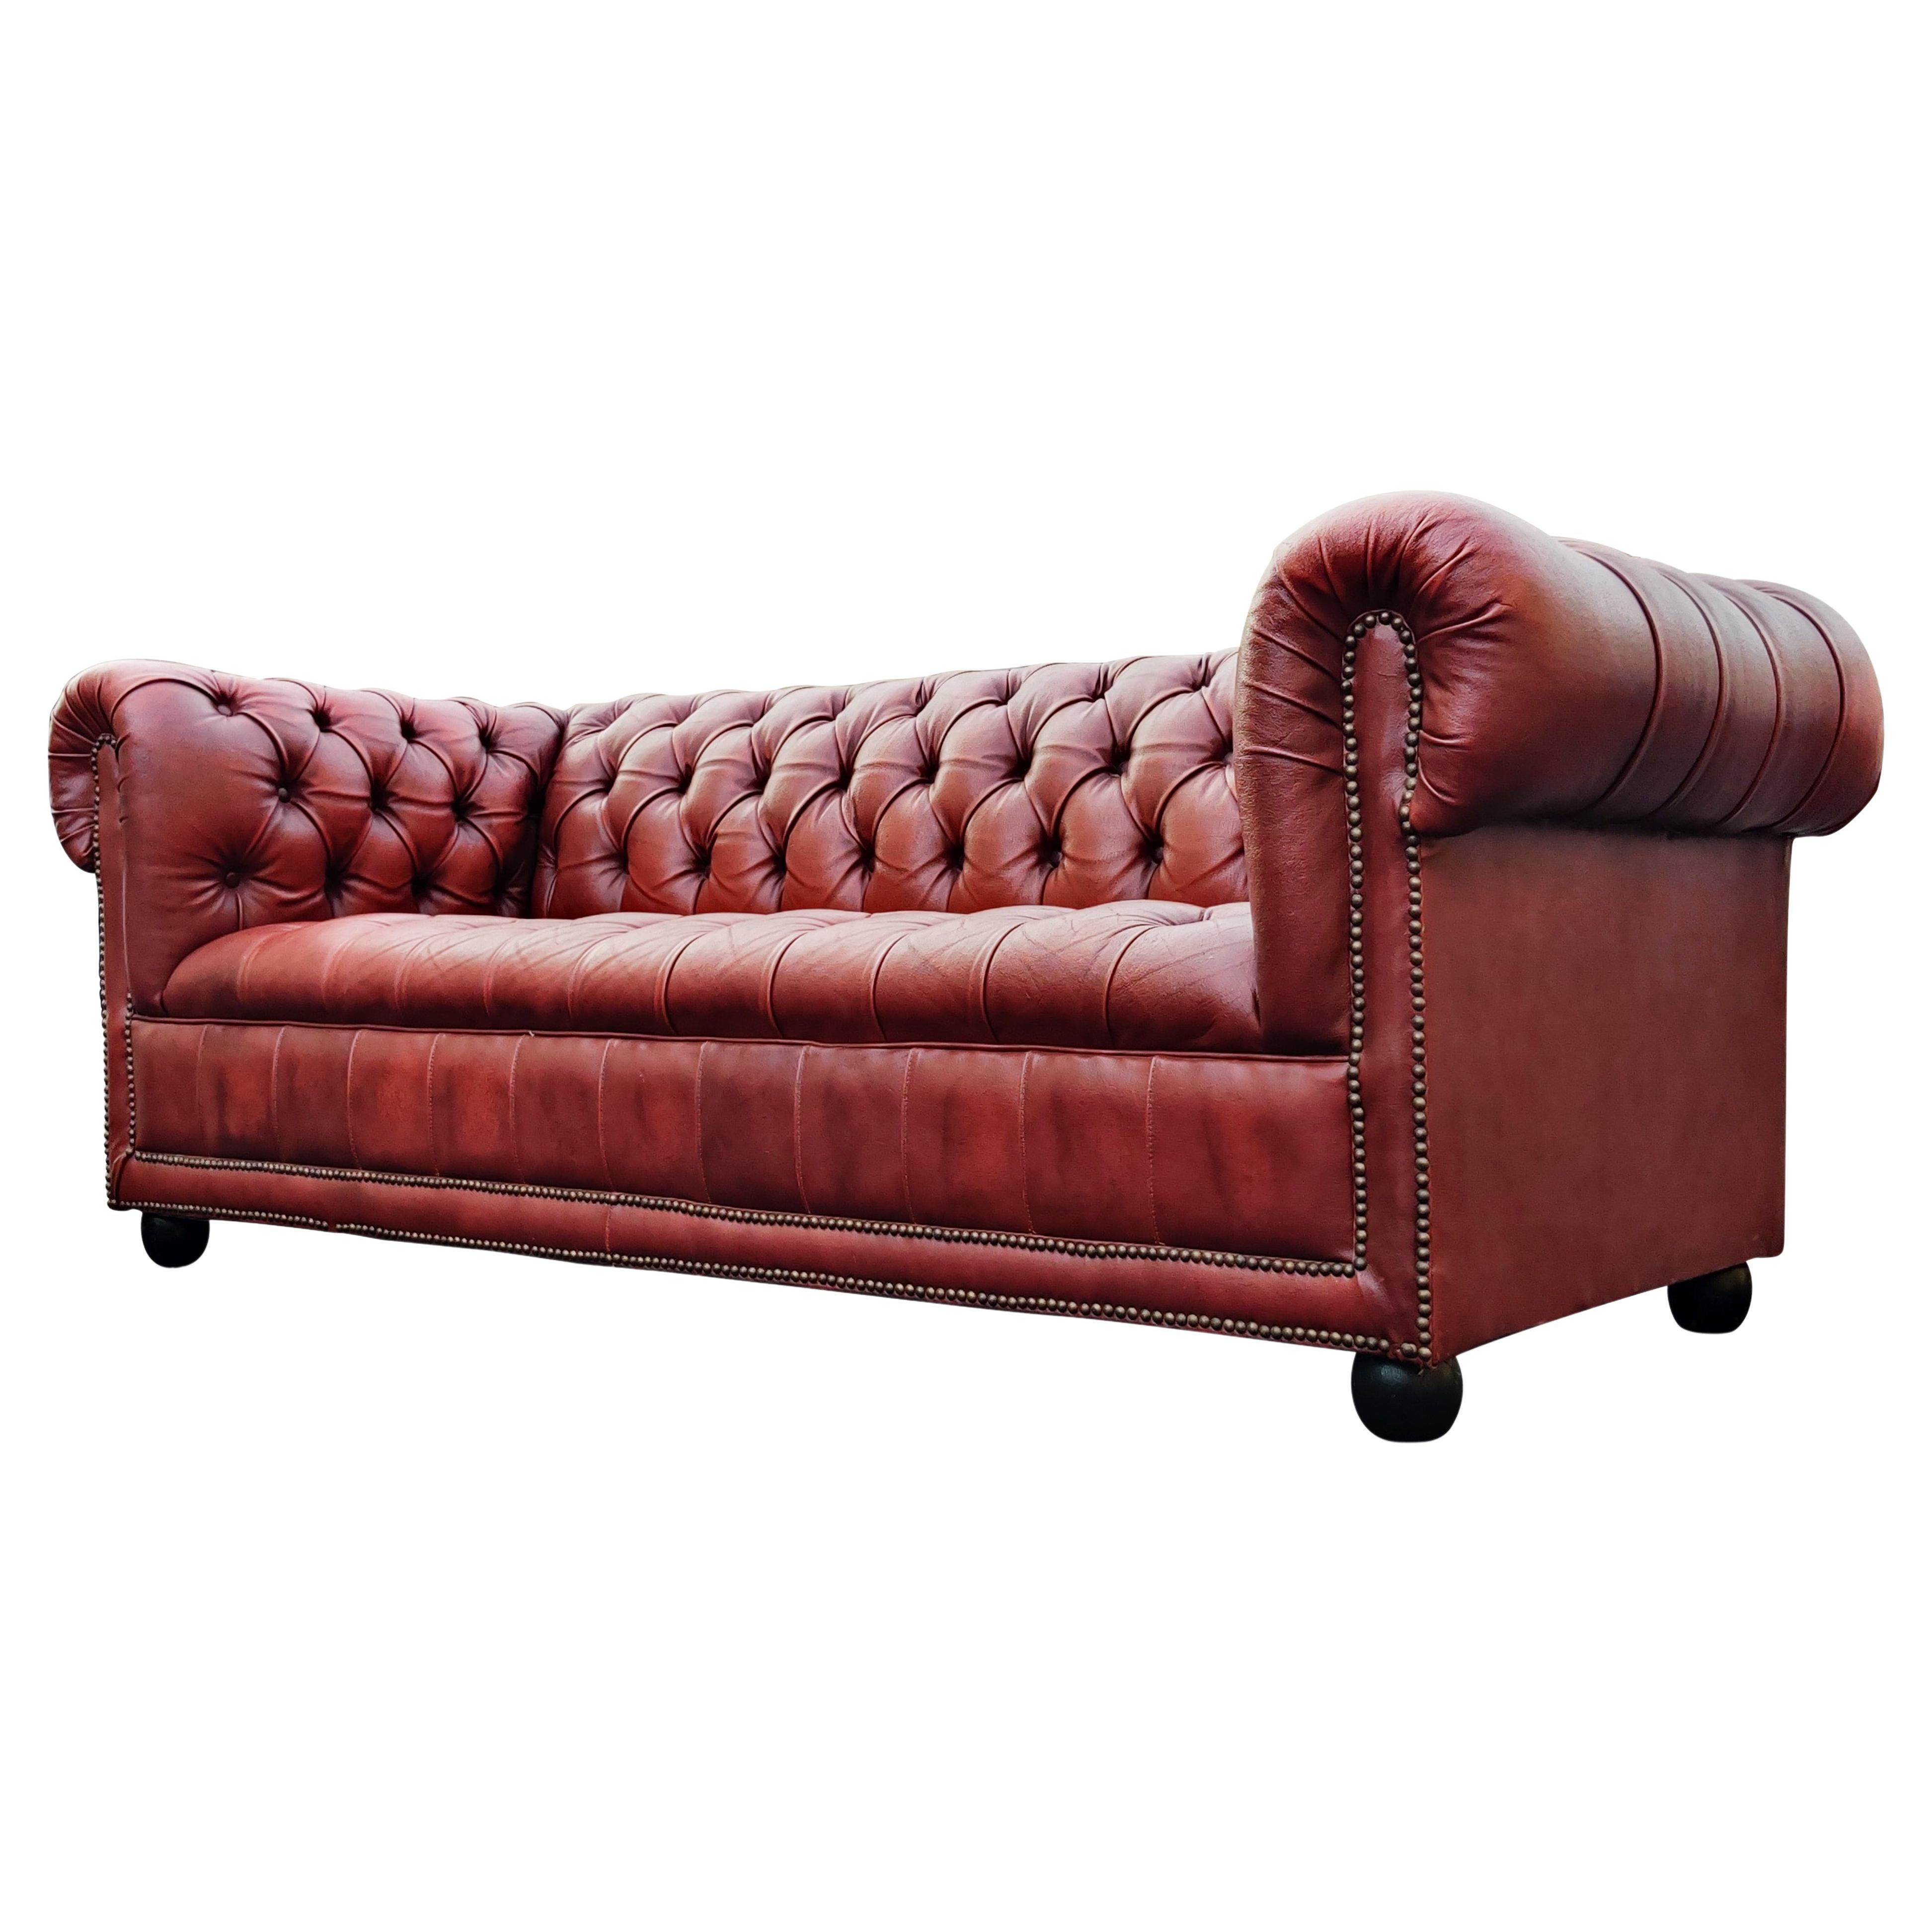 A classic English Chesterfield sofa or settee featuring an oxblood or cordovan leather. The frame is crafter with large English scrolled arms, having a tufted leather seat, arms, and back. Brass tacks or nail-heads accent the hand-tailoring